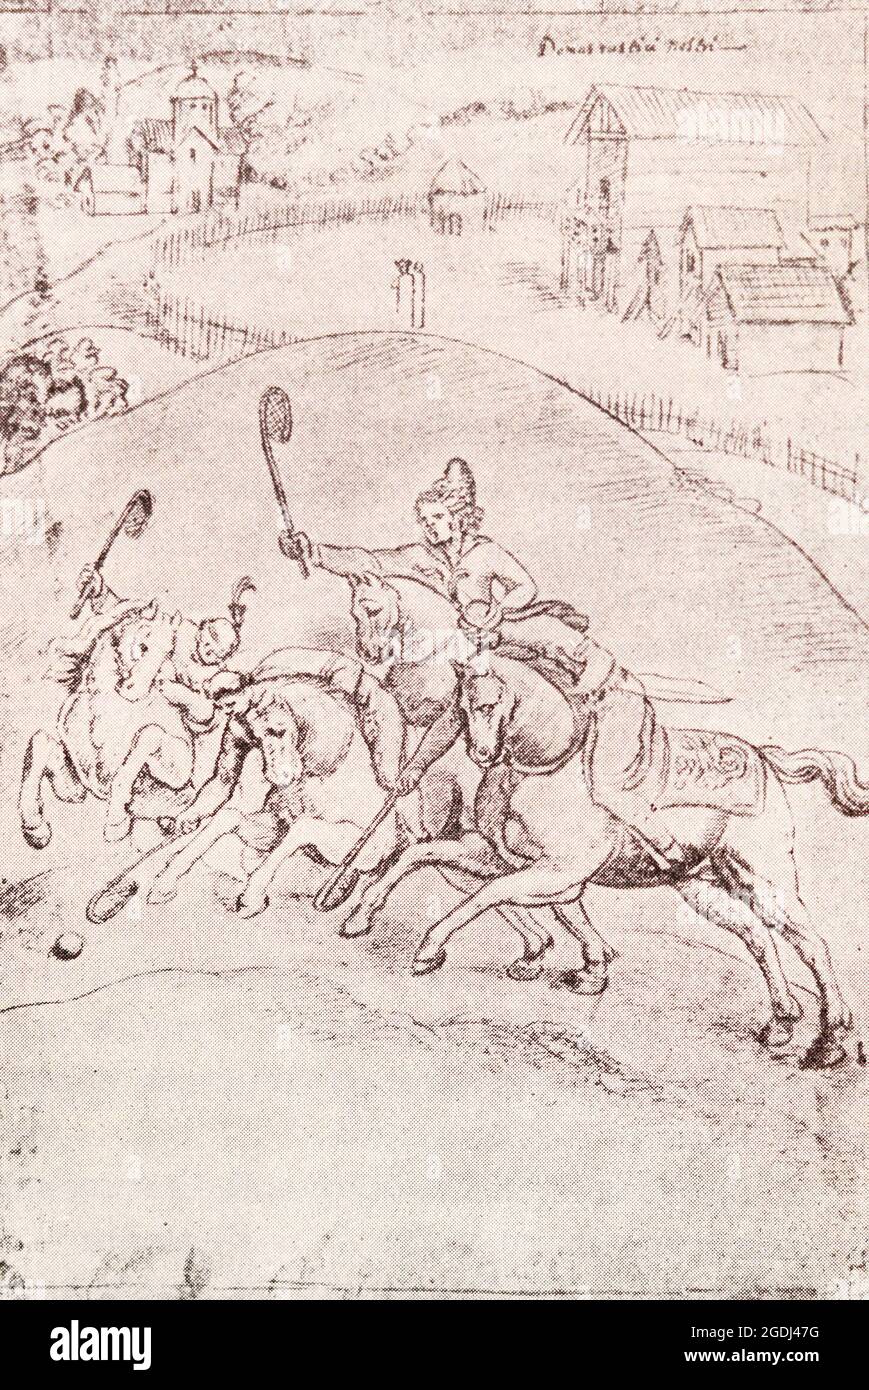 Trochus riders game. Drawing of the 17th century. Stock Photo